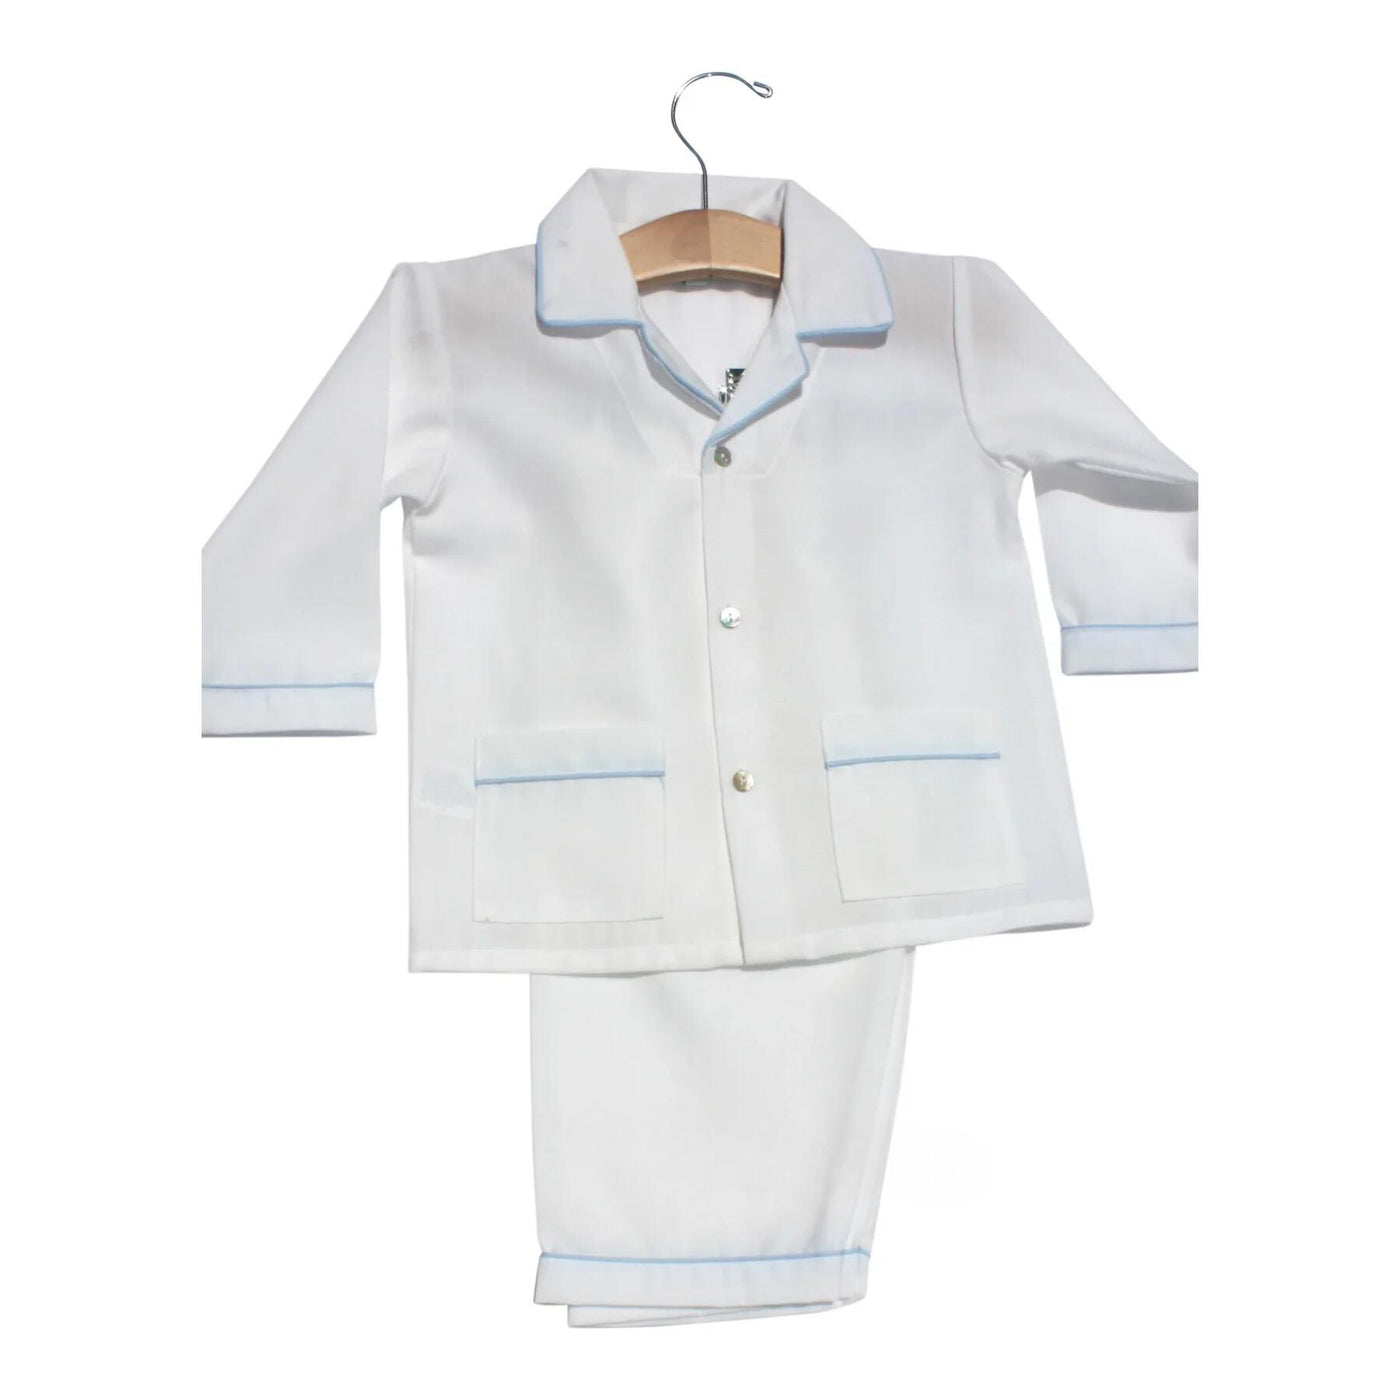 Long Sleeve Shirt & Pant PJ White with Blue Trim by Sweet Dreams